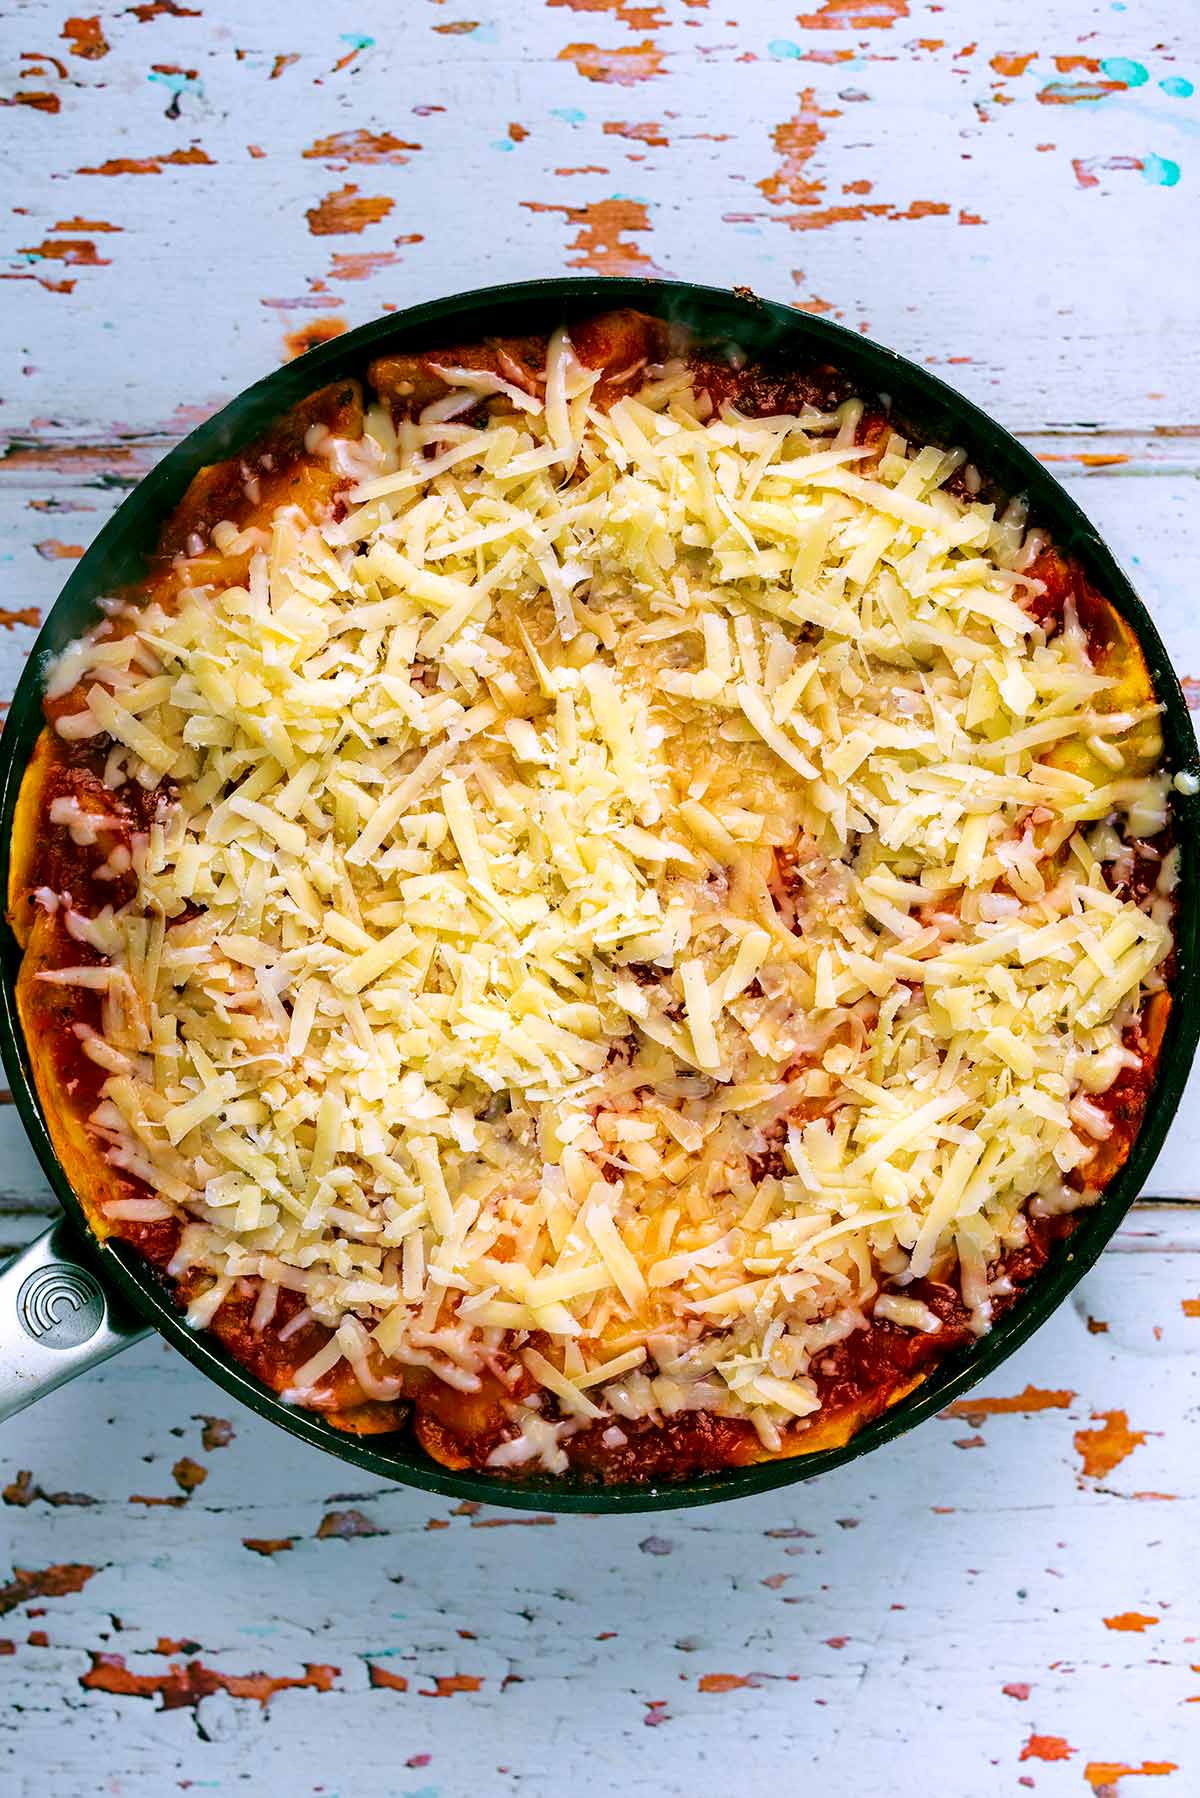 Skillet lasagna topped with grated cheese.